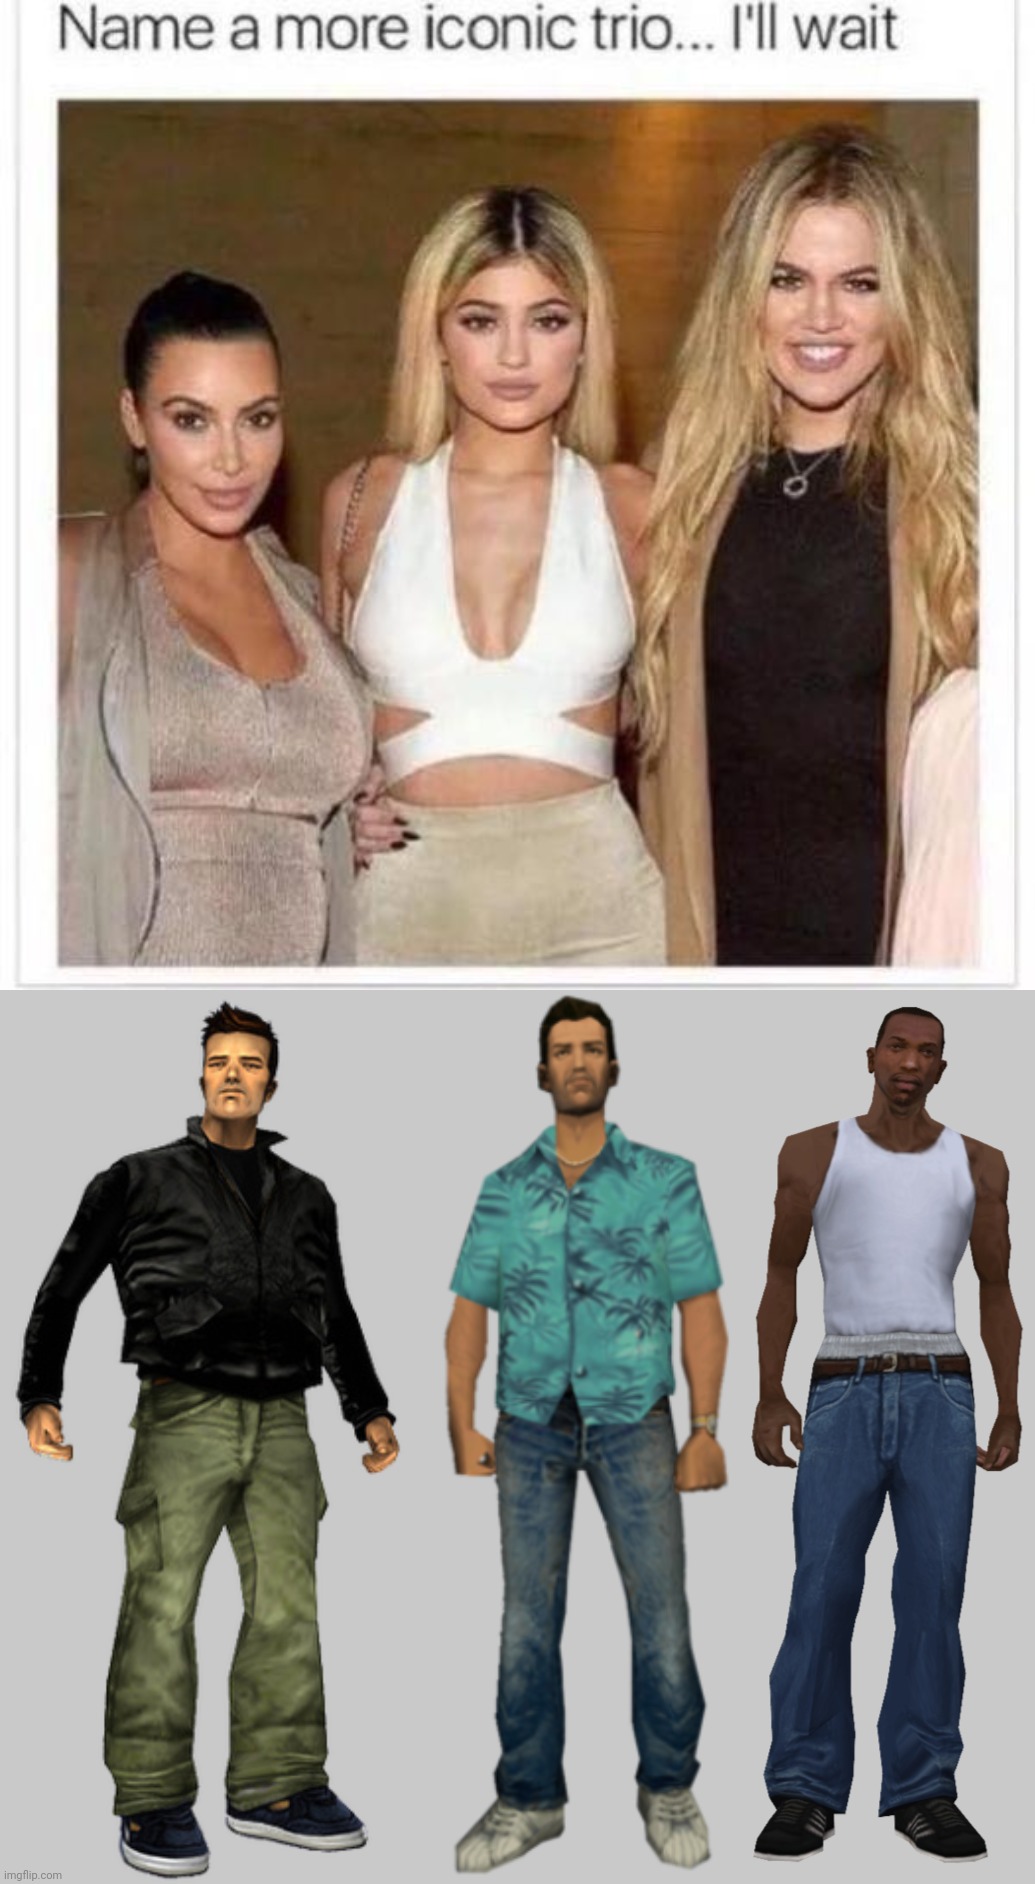 they met in trilogy even though they are from different games | image tagged in name a more iconic trio,gta,grand theft auto | made w/ Imgflip meme maker